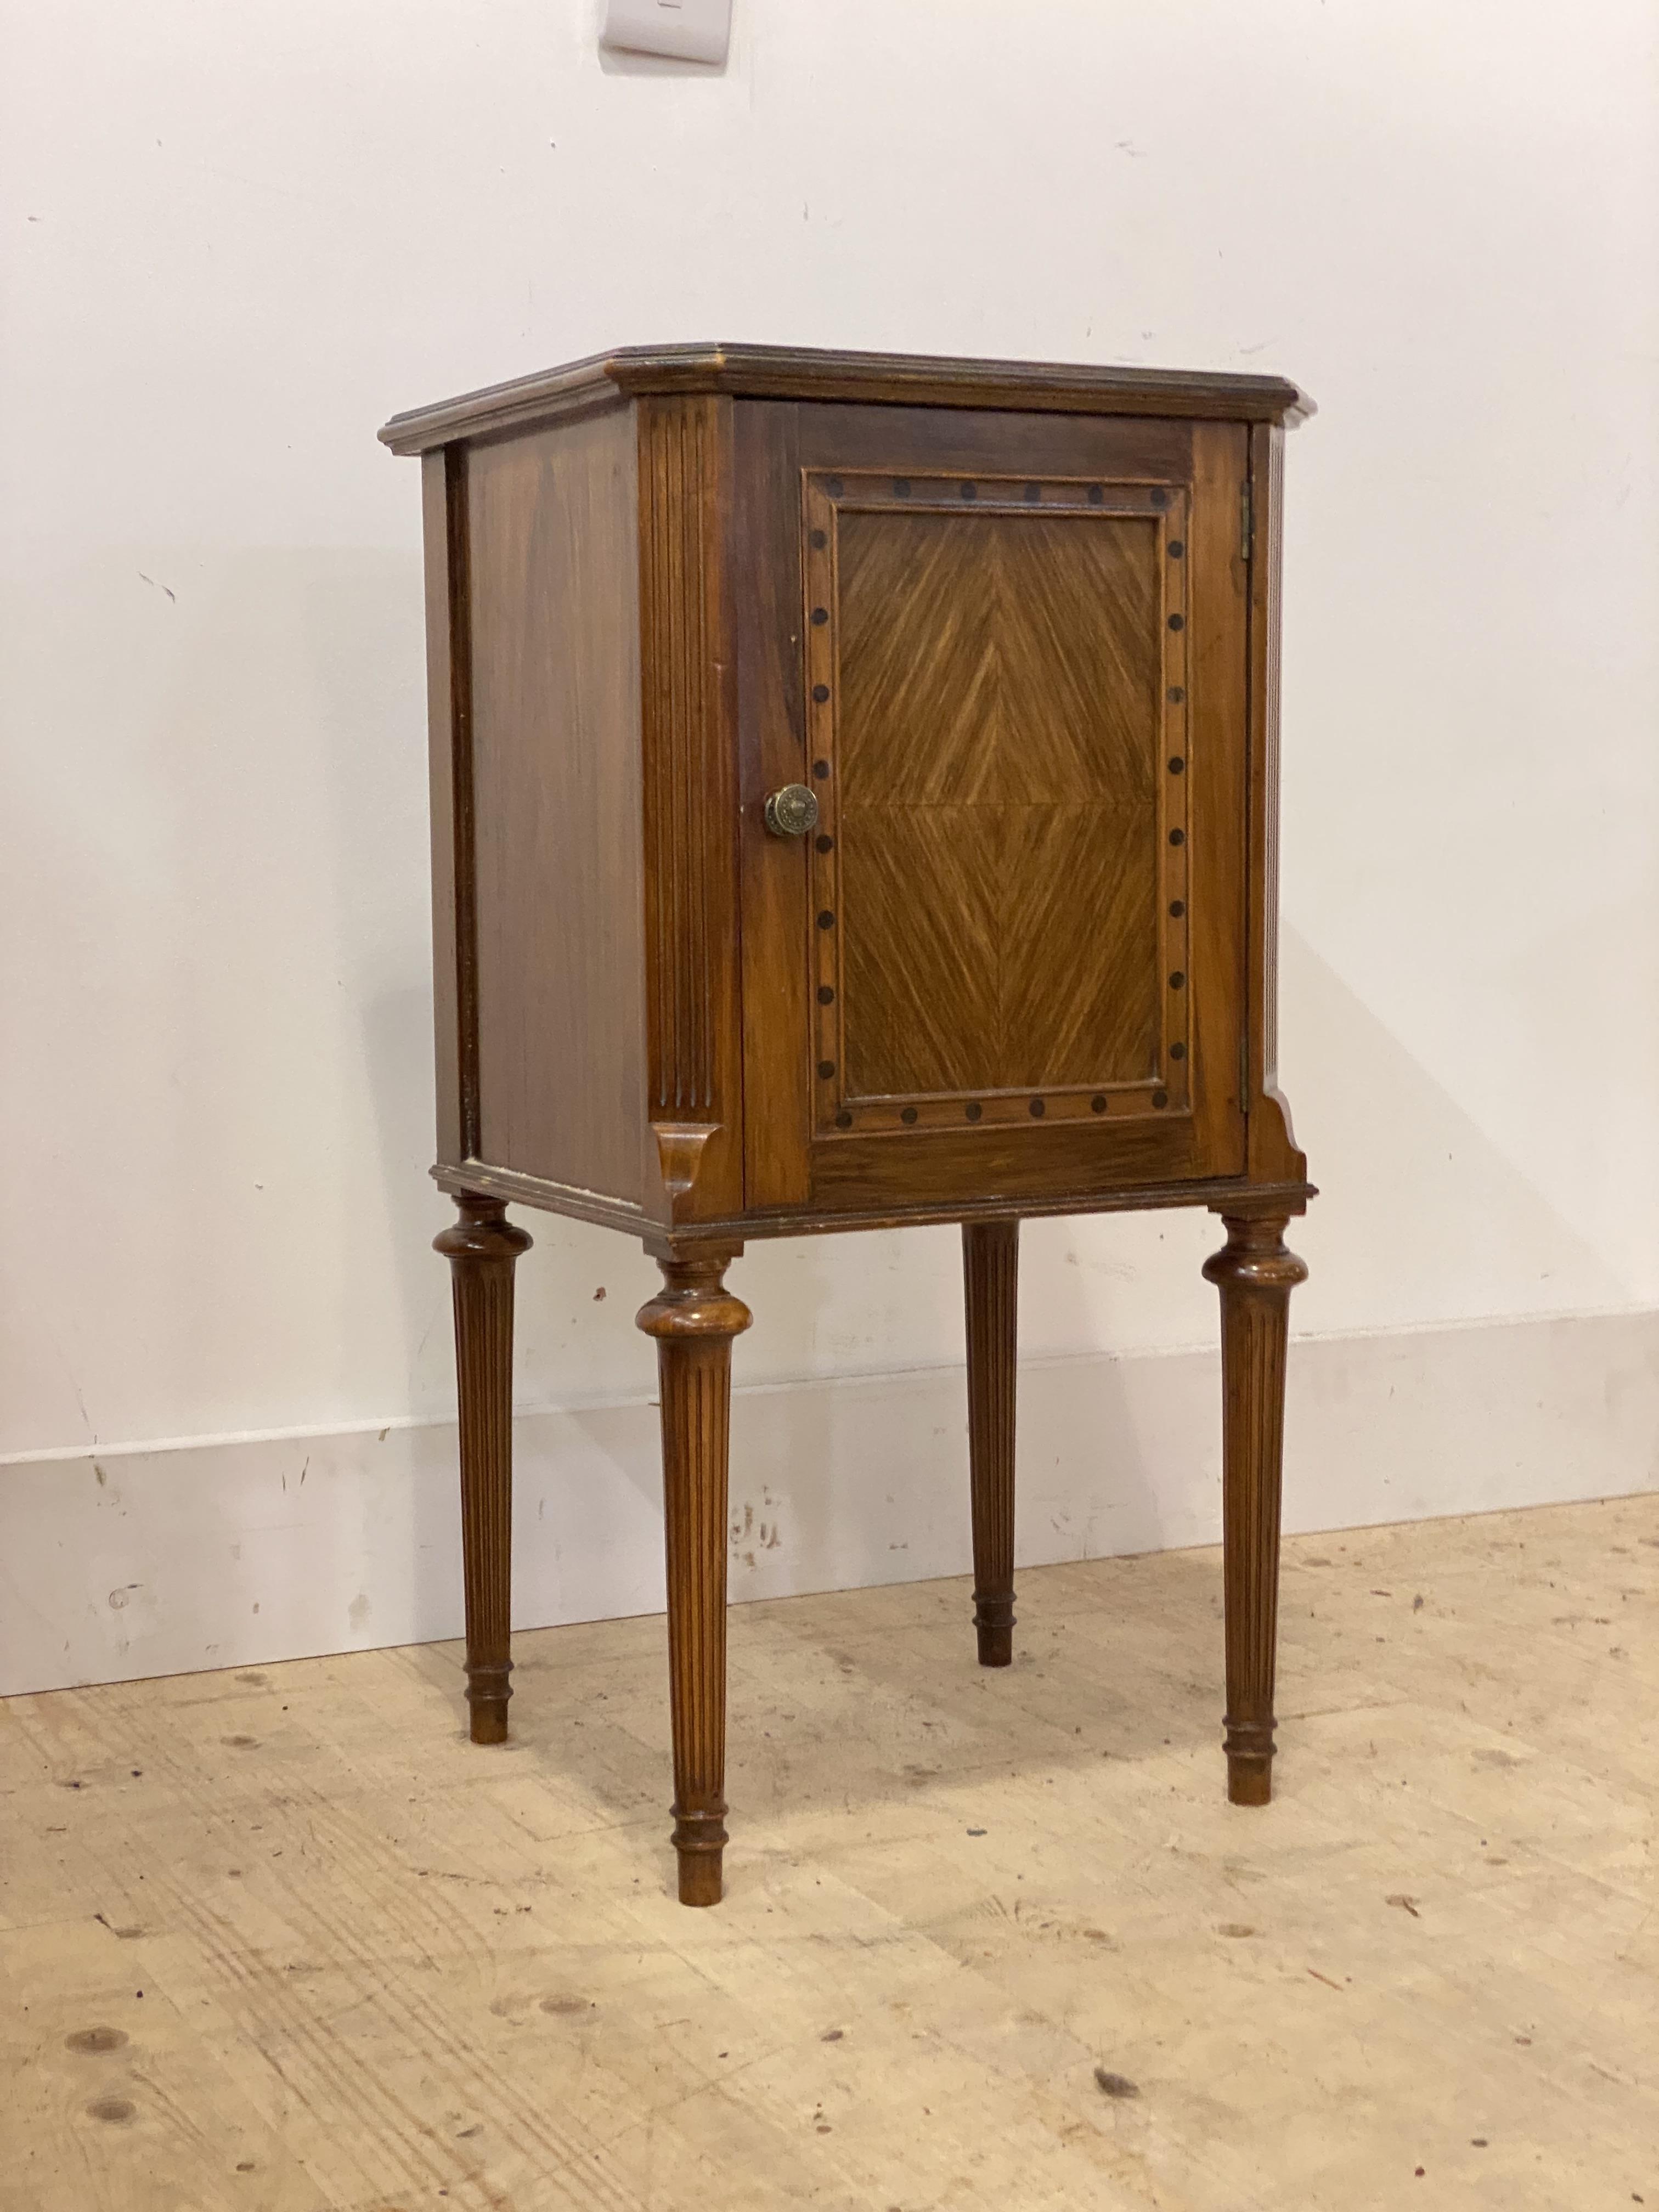 A French Empire style walnut night commode or bedside cupboard, early 20th century, single